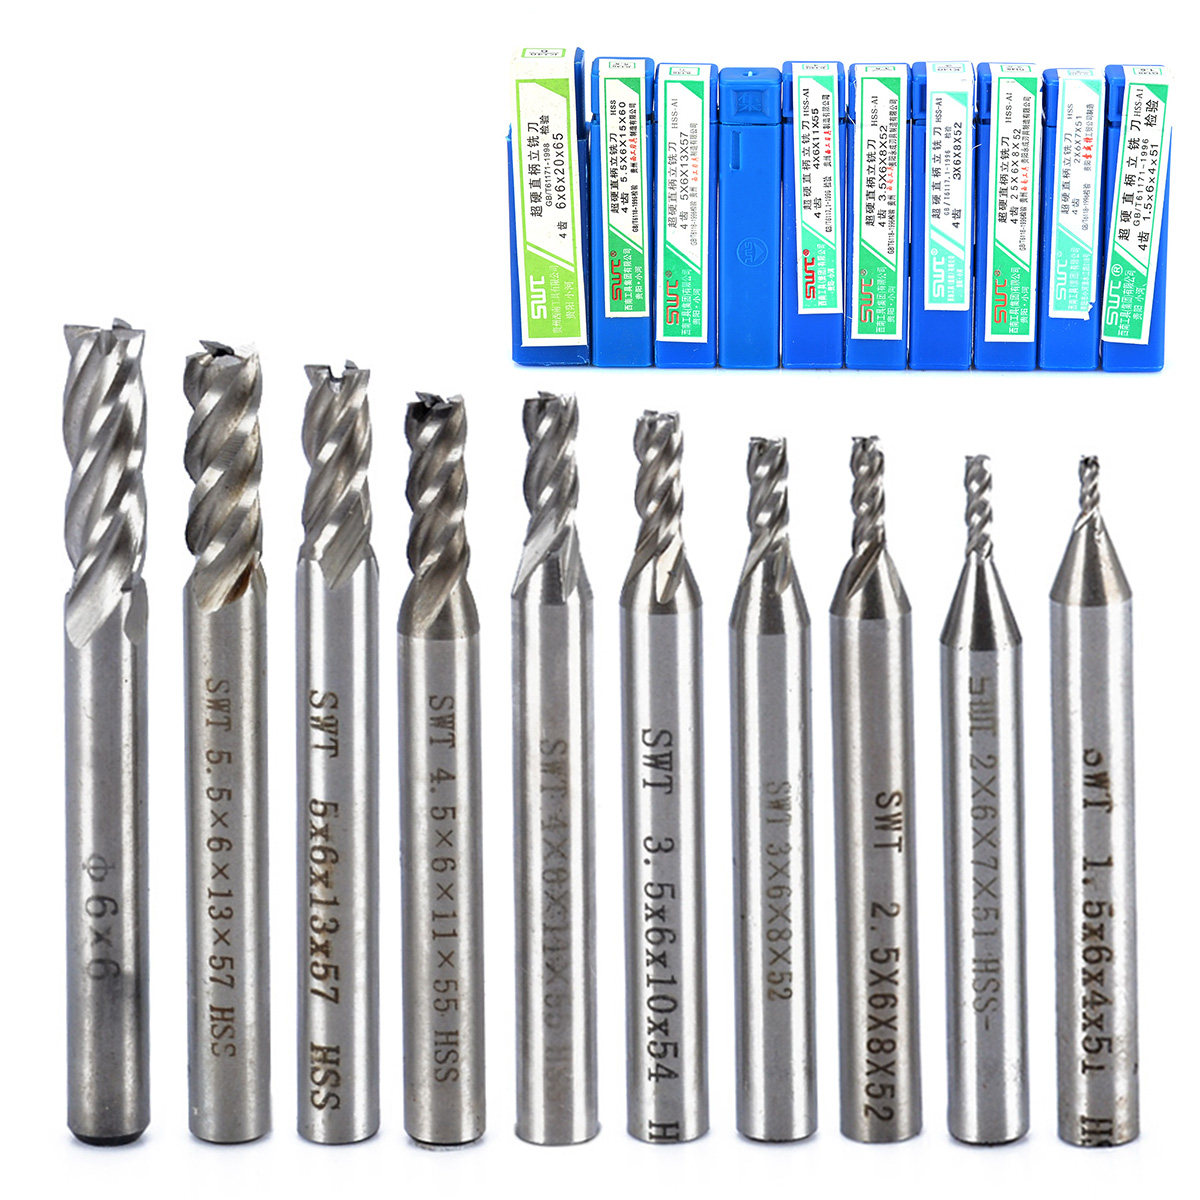 3MM Solid Carbide Straight Shank 4Flute End Mill CNC Milling Cutter Drill Bit 